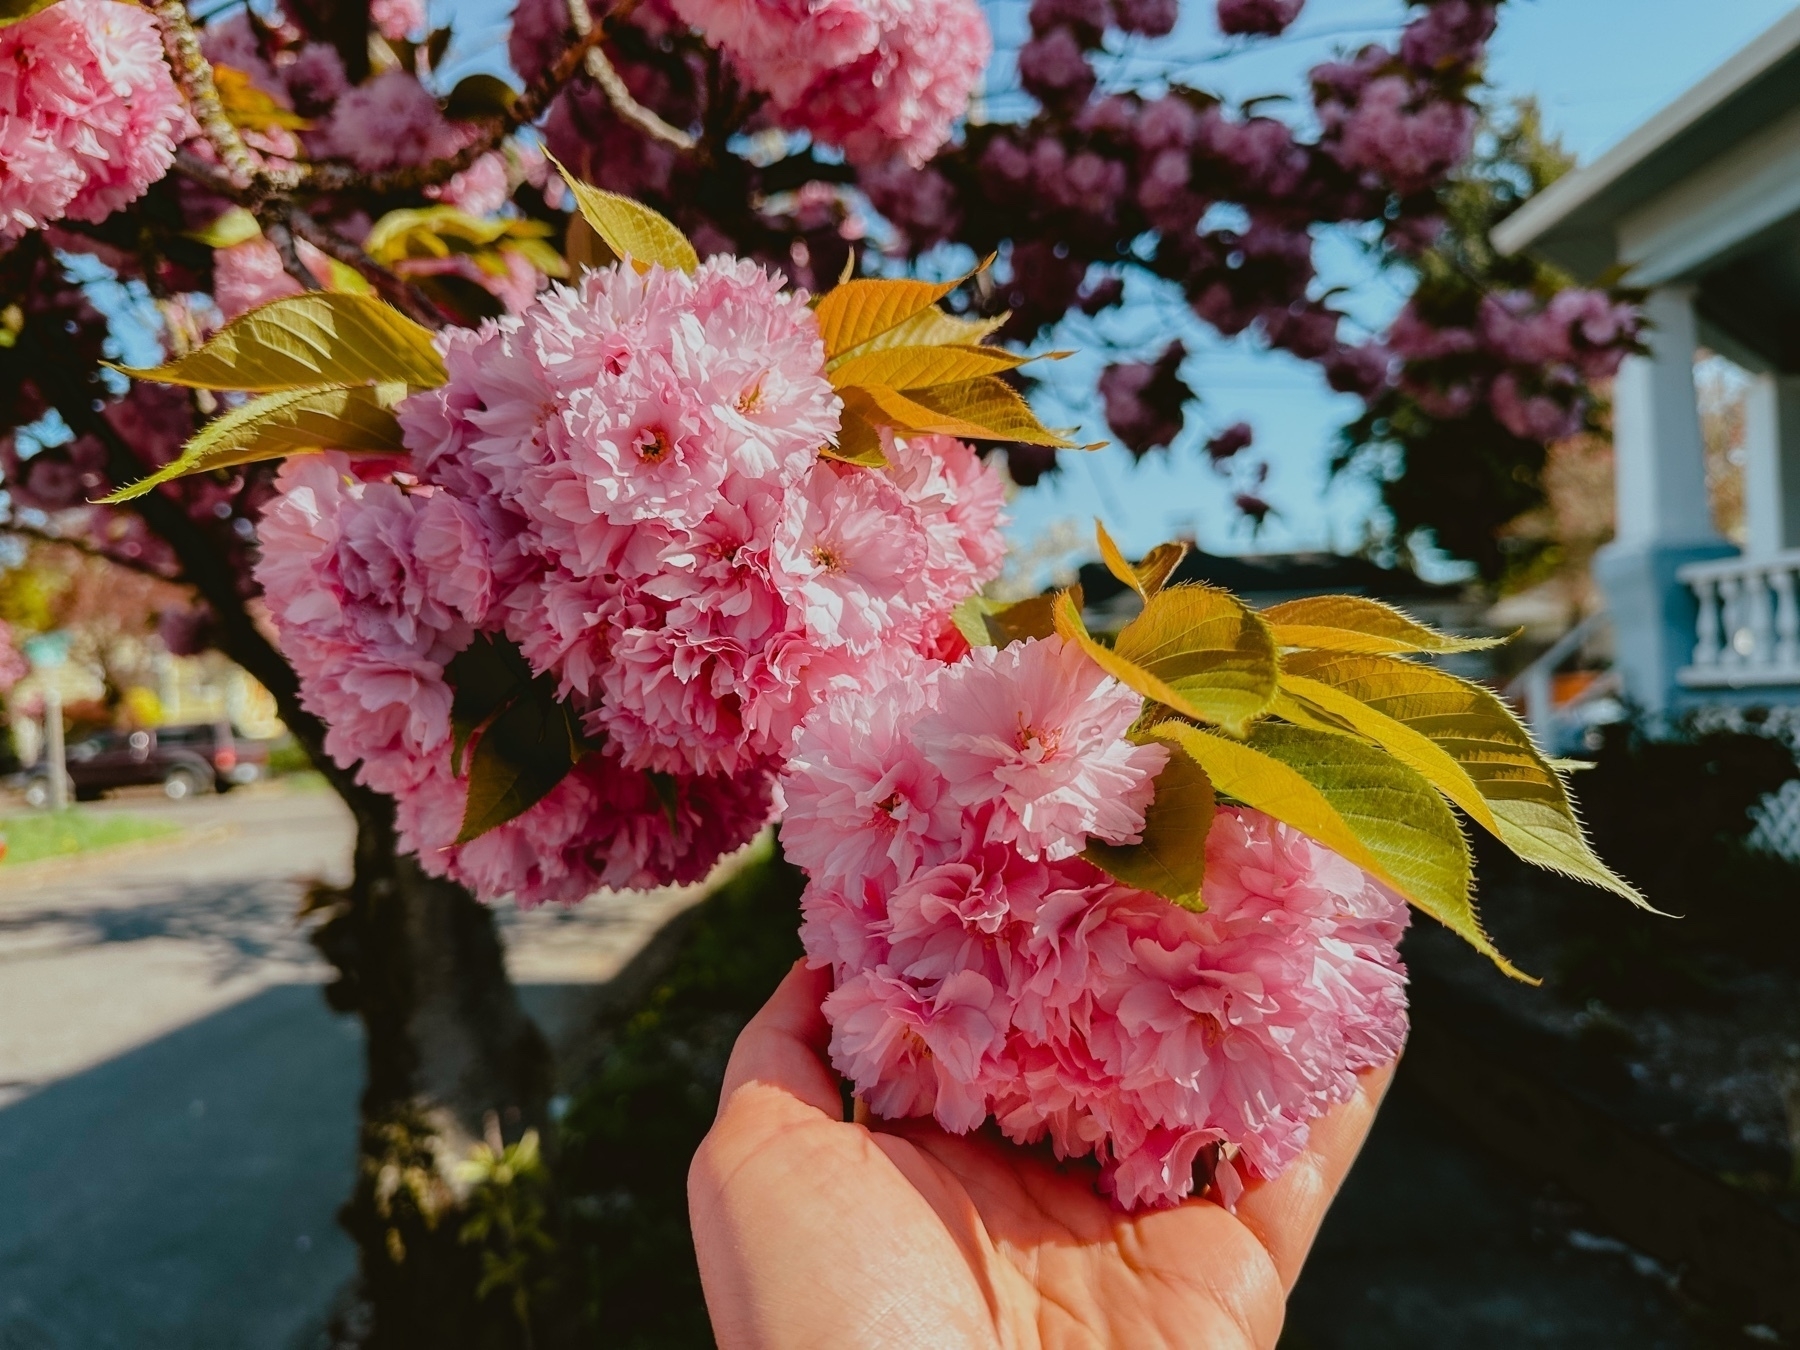 A hand holds a cluster of pink cherry blossoms basked in the warmth of late morning sun.